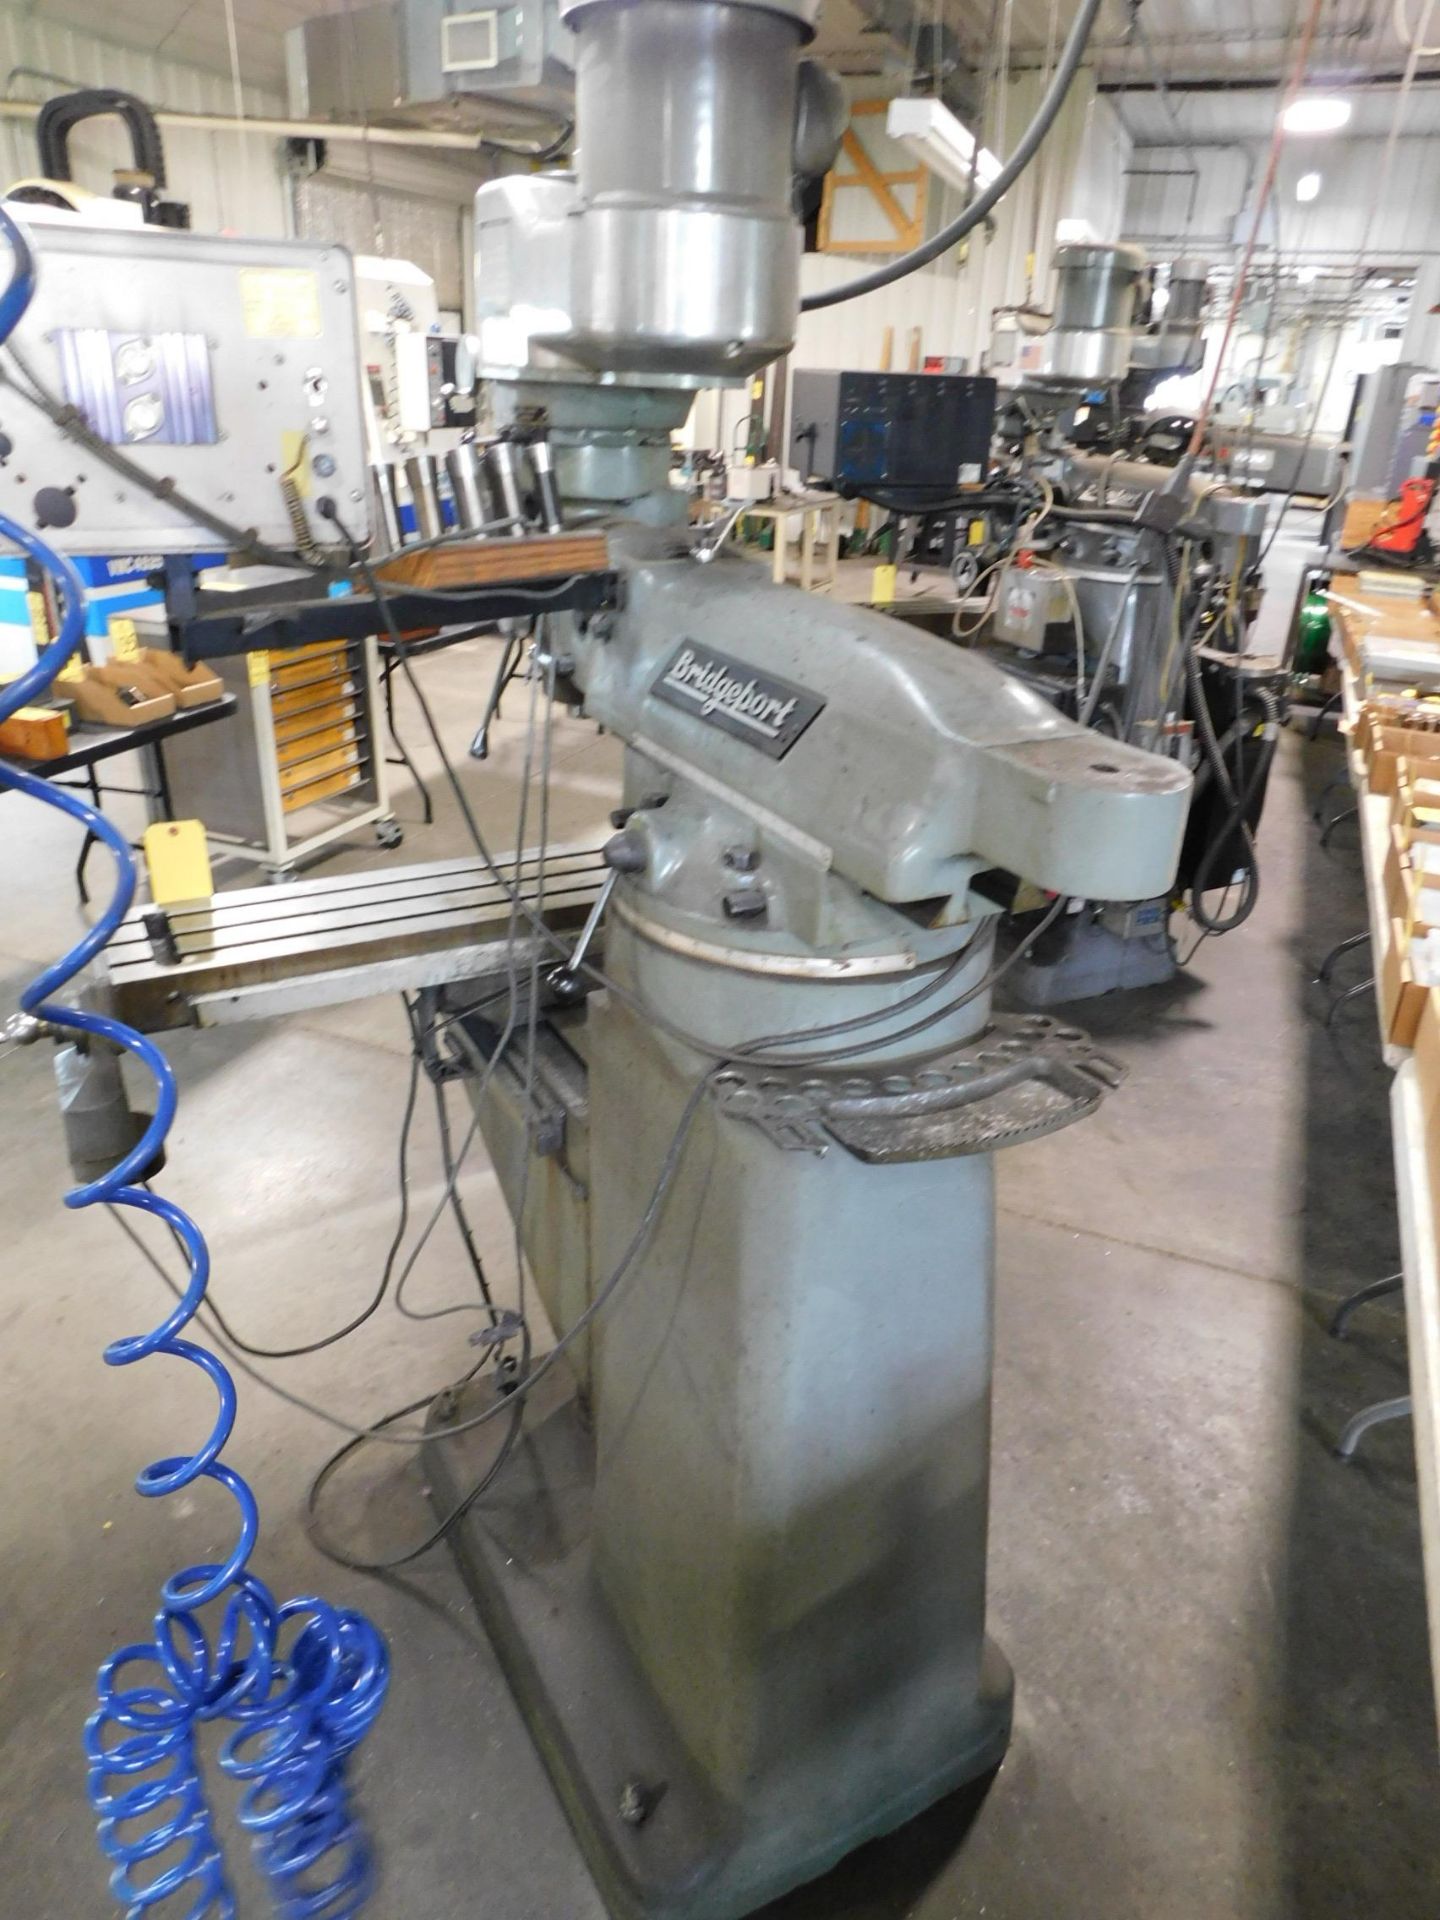 Bridgeport Series I 2H.P. Vertical Mill sn# 12BR235748, 9"X48" Table, Servo Table Powerfeed, - Image 11 of 11